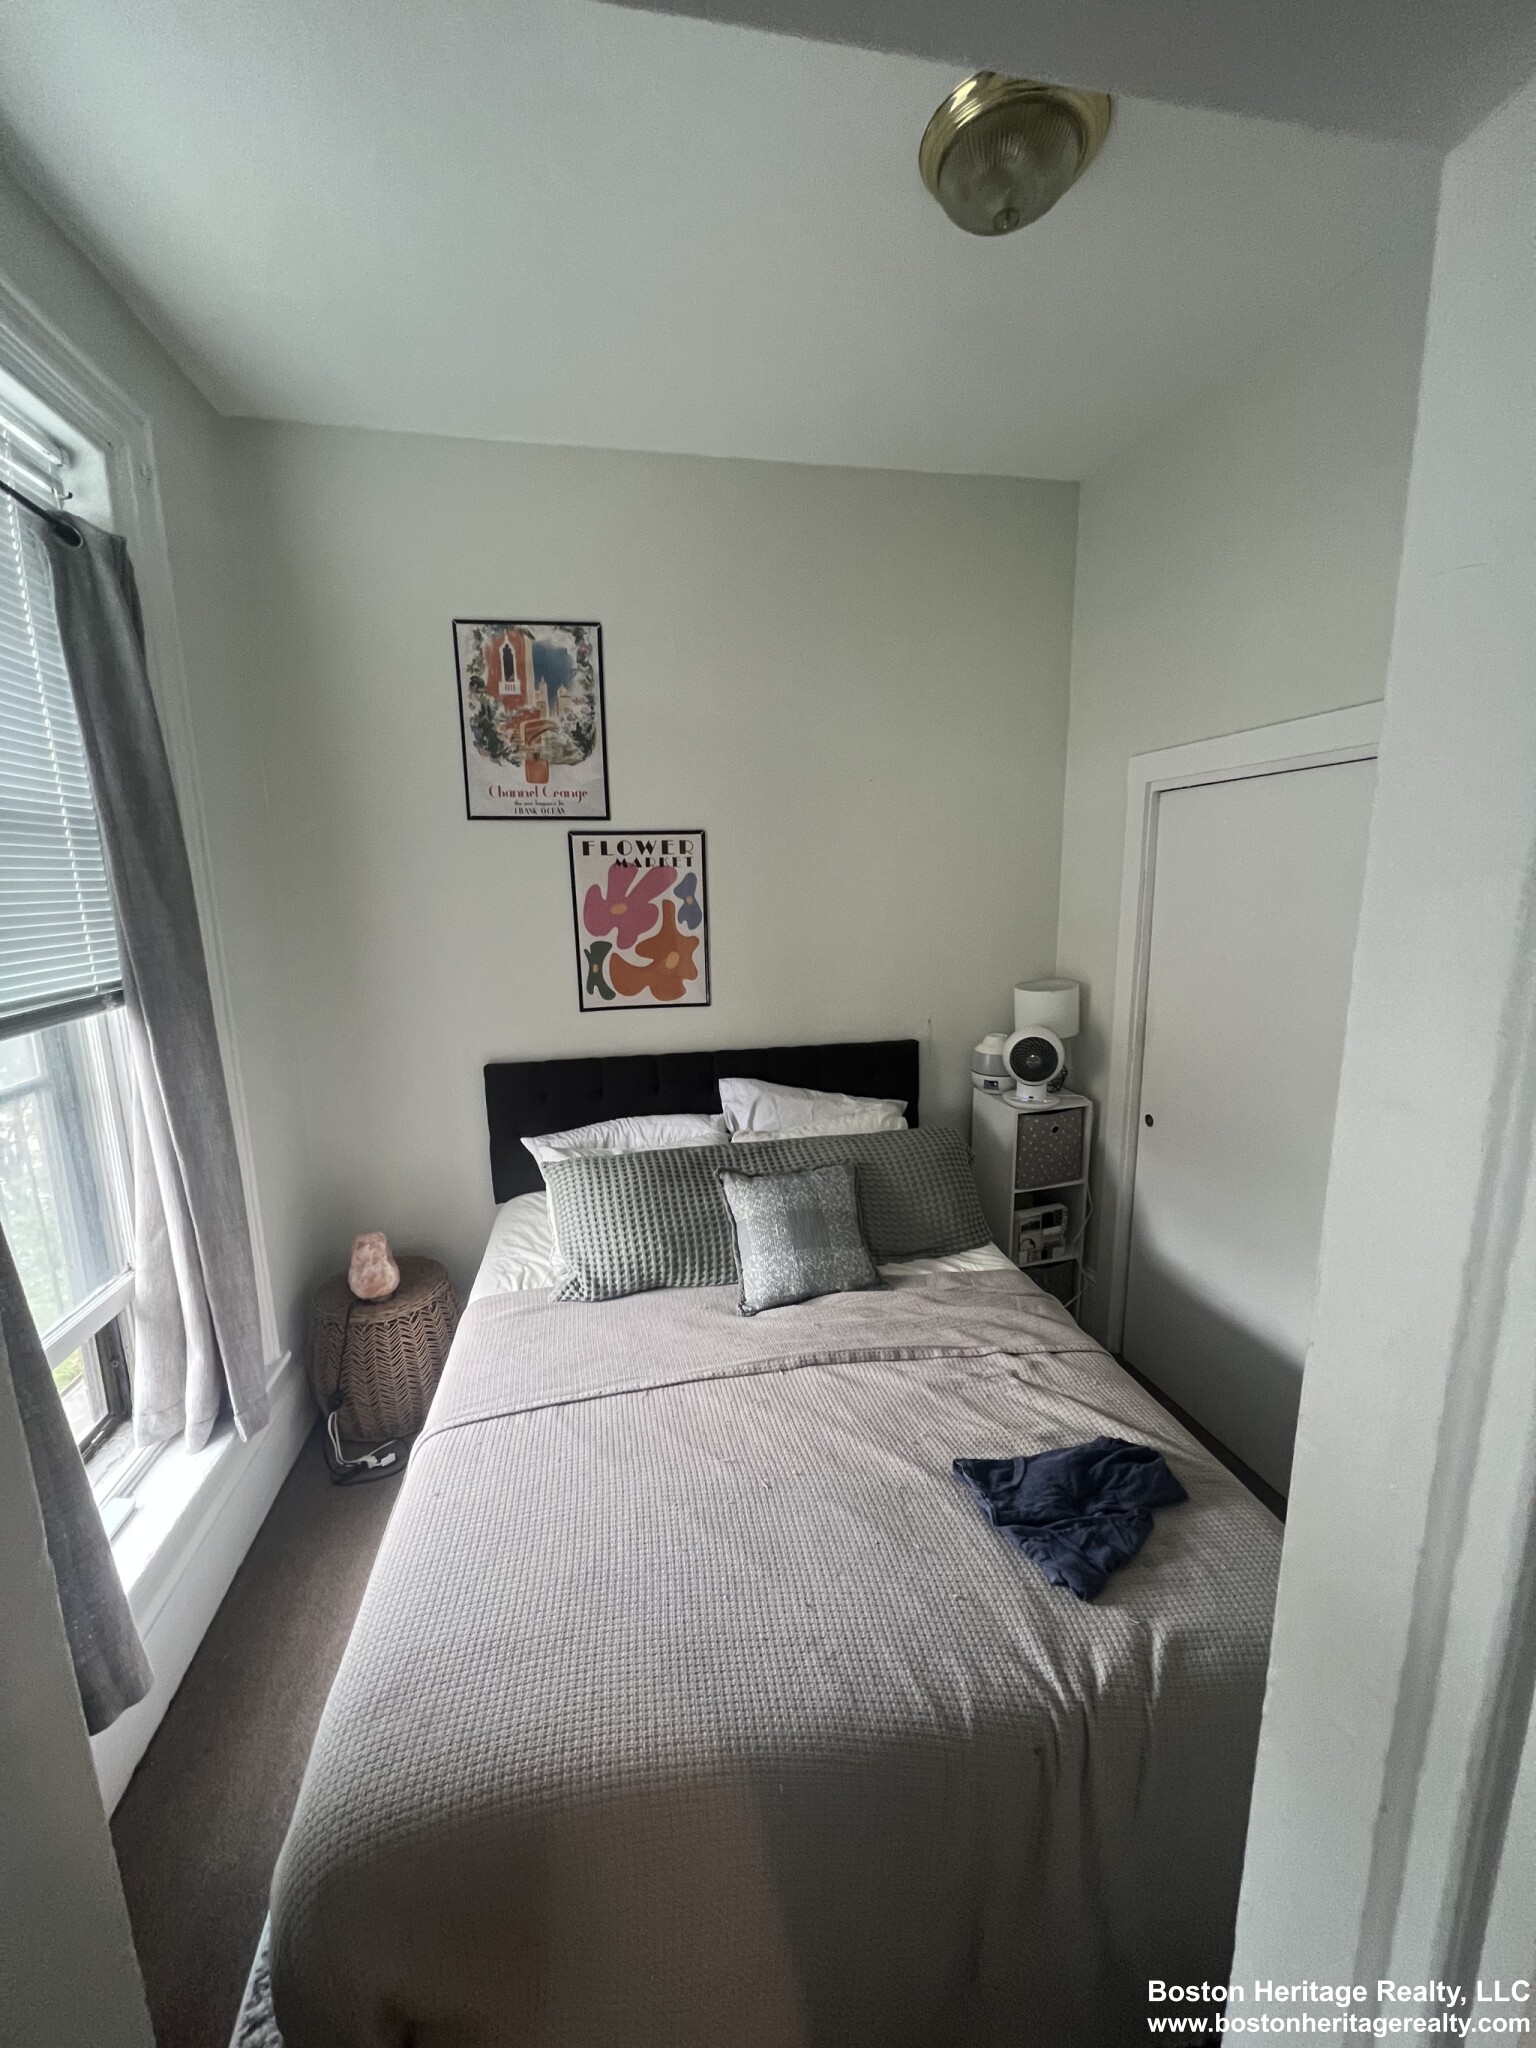 1 Bed, 1 Bath apartment in Boston, South End for $2,250